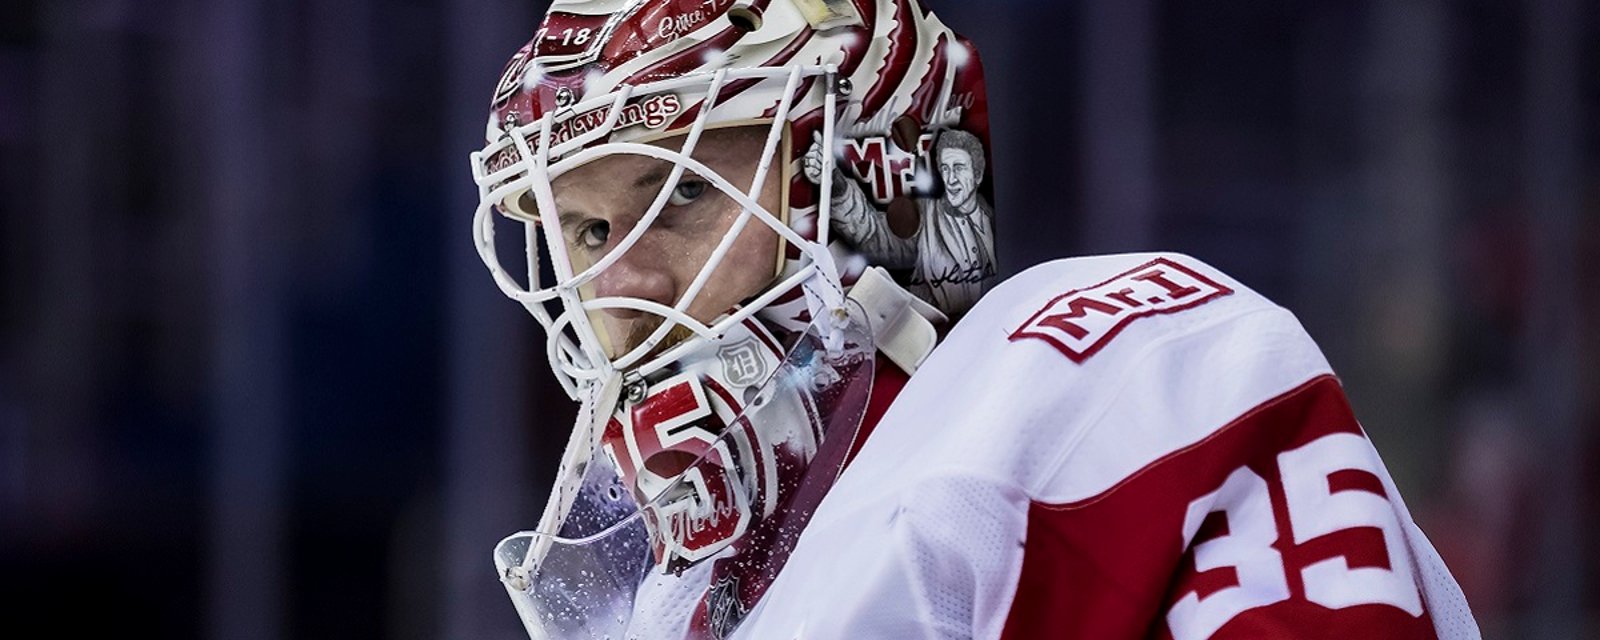 Jimmy Howard wants to keep playing, even if it means leaving the Red Wings.